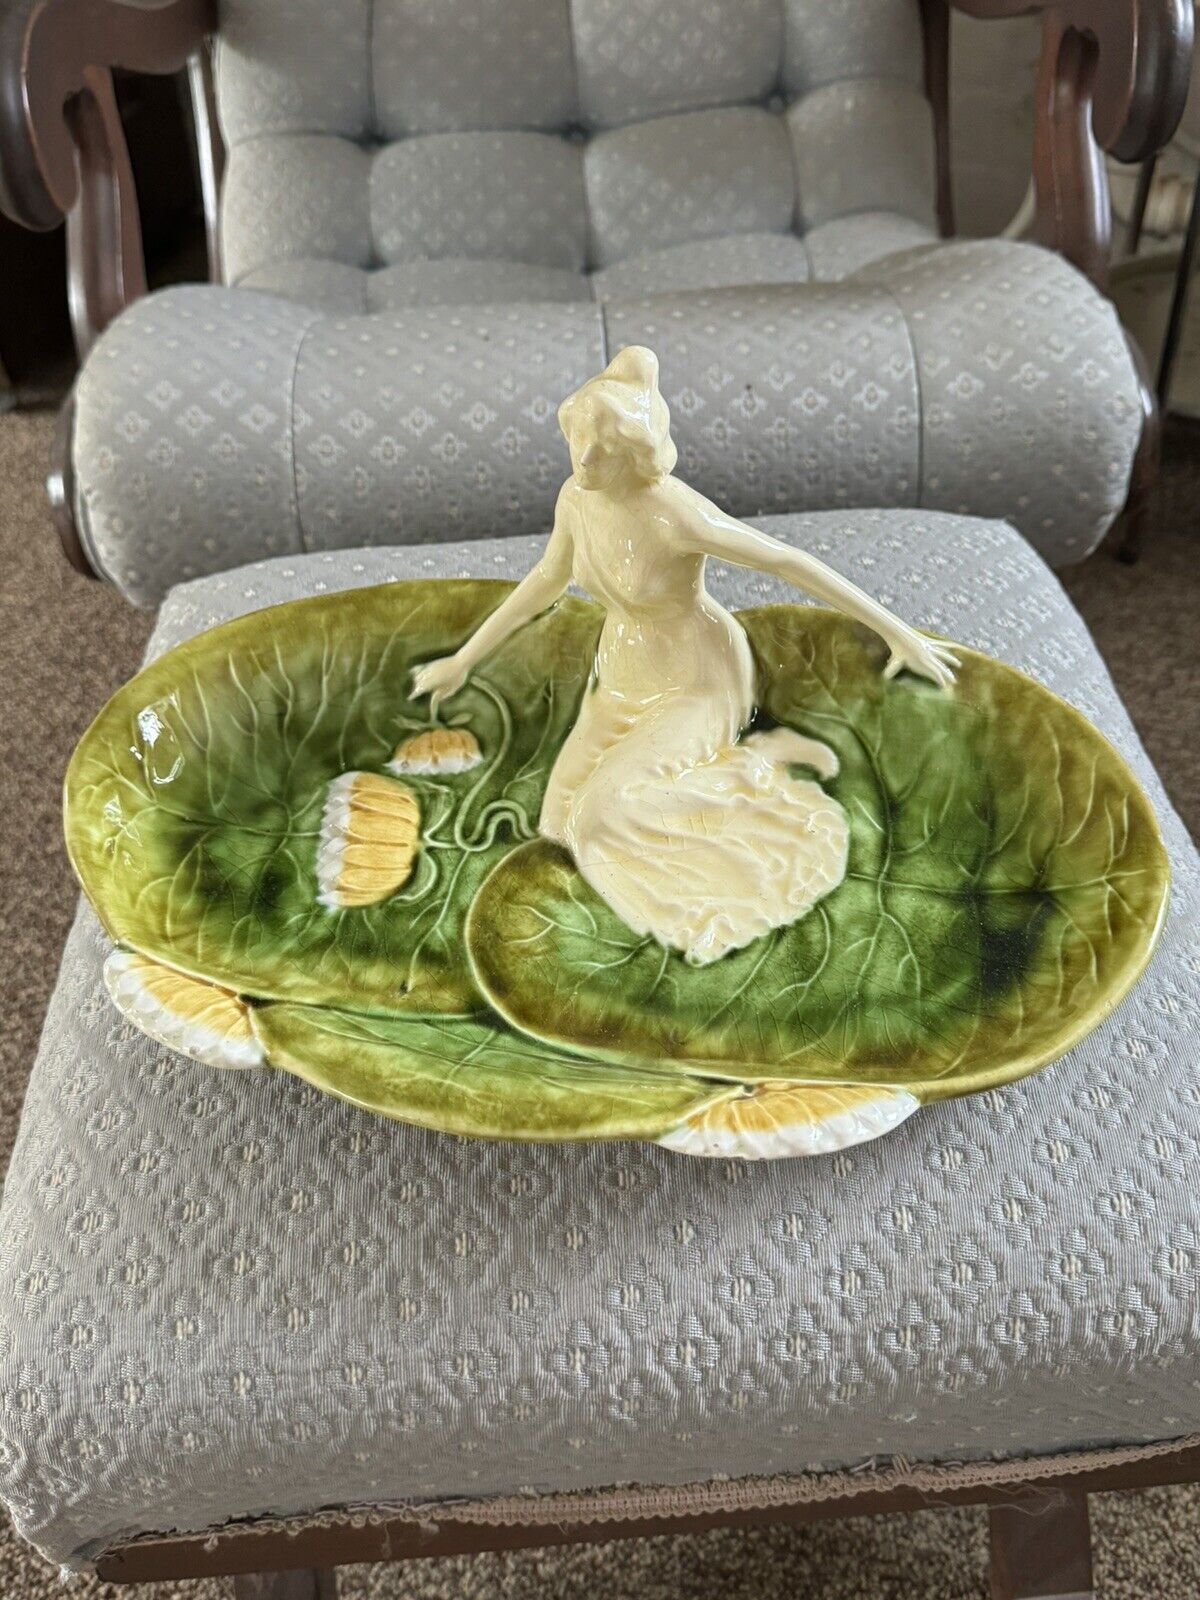 Antique Royal Dux Attributed Ceramic Art Nouveau Lady in a Lily Pond Dish